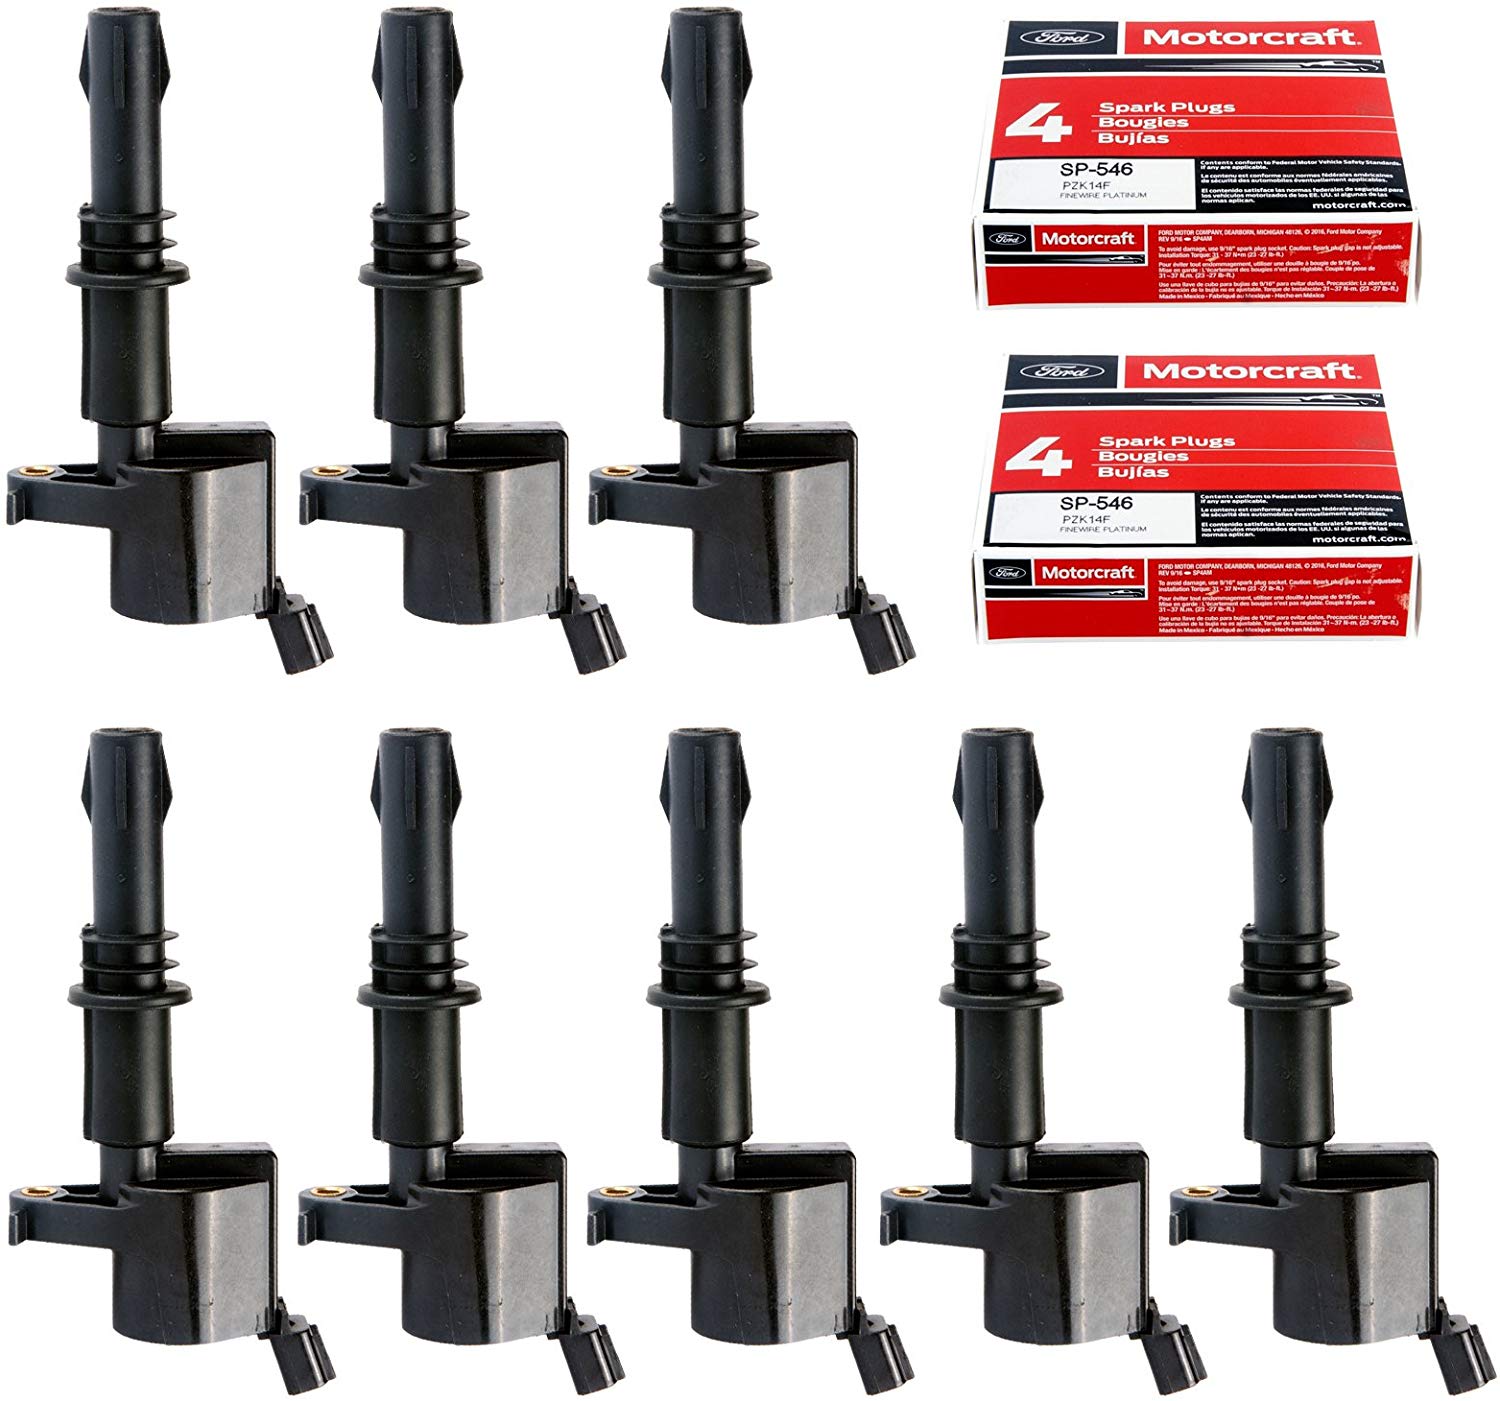 MAS Set of 8 Ignition Coils GDG511 GD511 FD508 Motorcraft Spark Plugs SP546 PZH14F For 2005-2008 Ford F150 F-150 Lincoln SP515